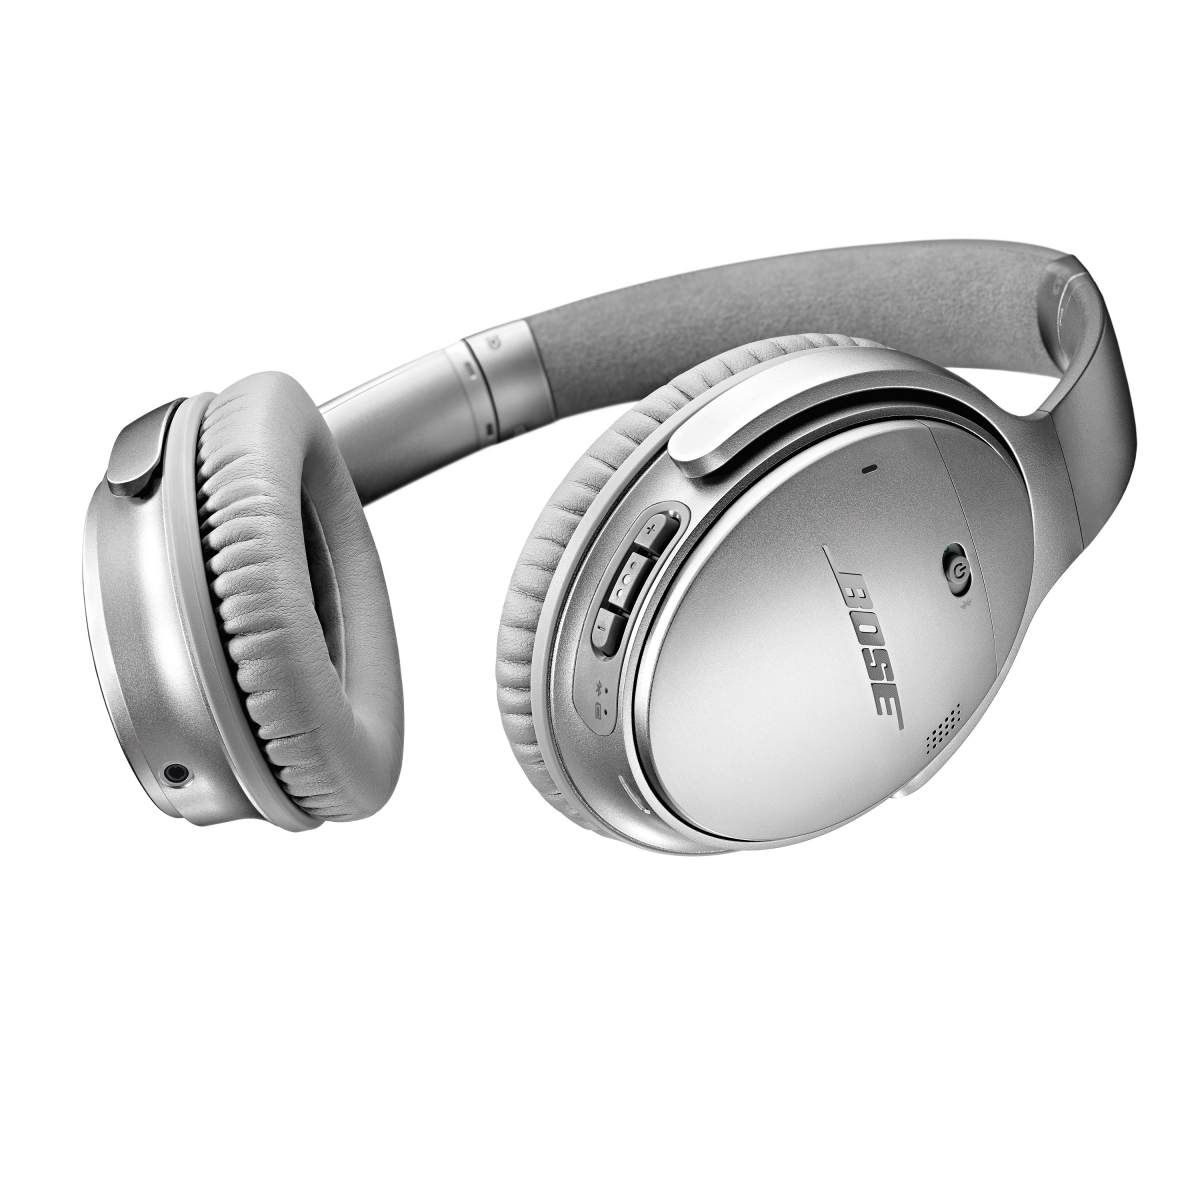 Bose adds QC 35 to its wireless audio volume - IBTimes India